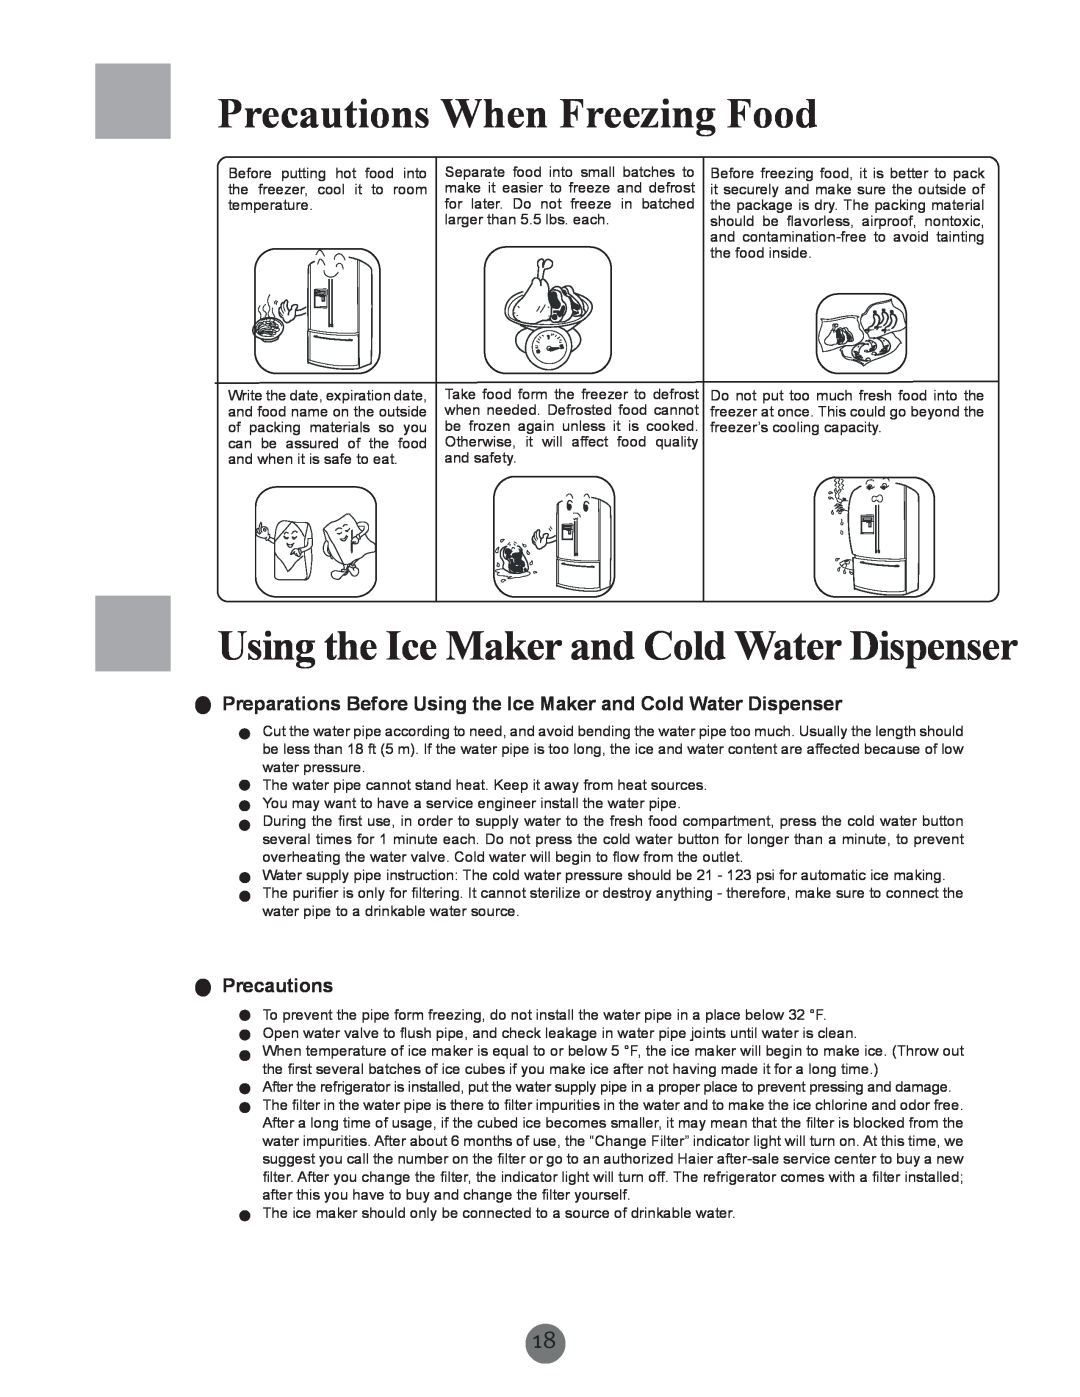 Haier RRCS25TD, PRCS25ED, PRCS25SD warranty Precautions When Freezing Food, Using the Ice Maker and Cold Water Dispenser 